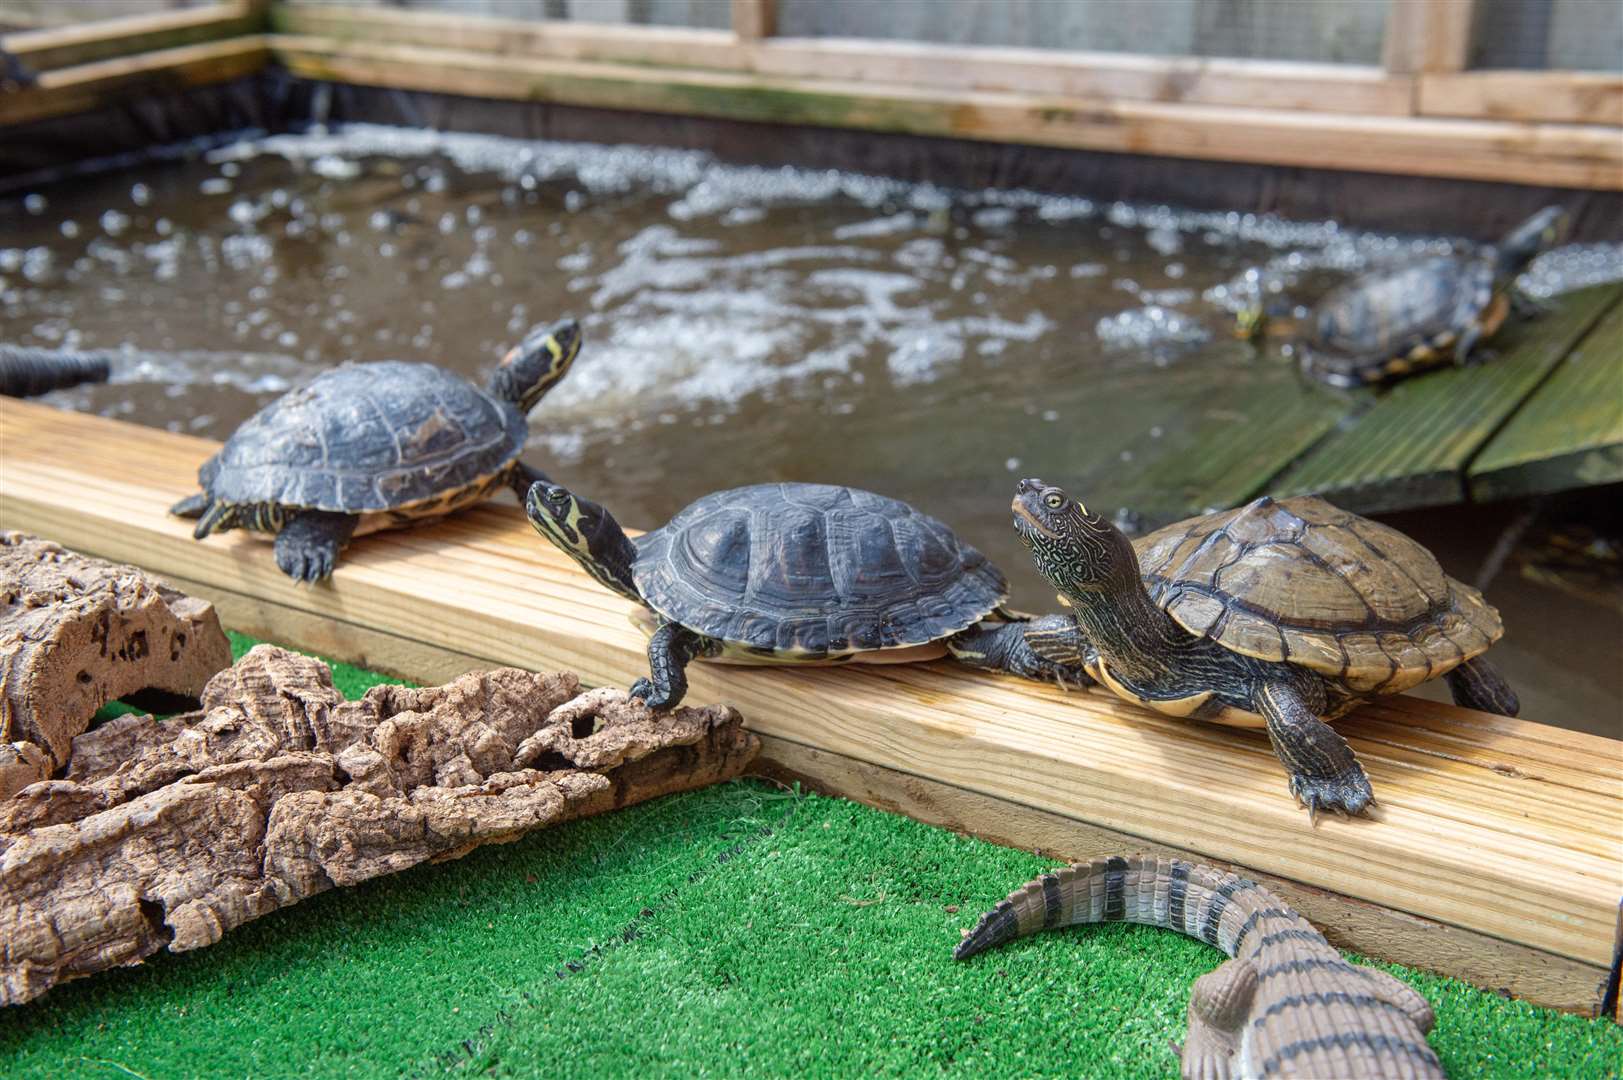 Michael Butcher has converted his home and back garden into a turtle and terrapin sanctuary